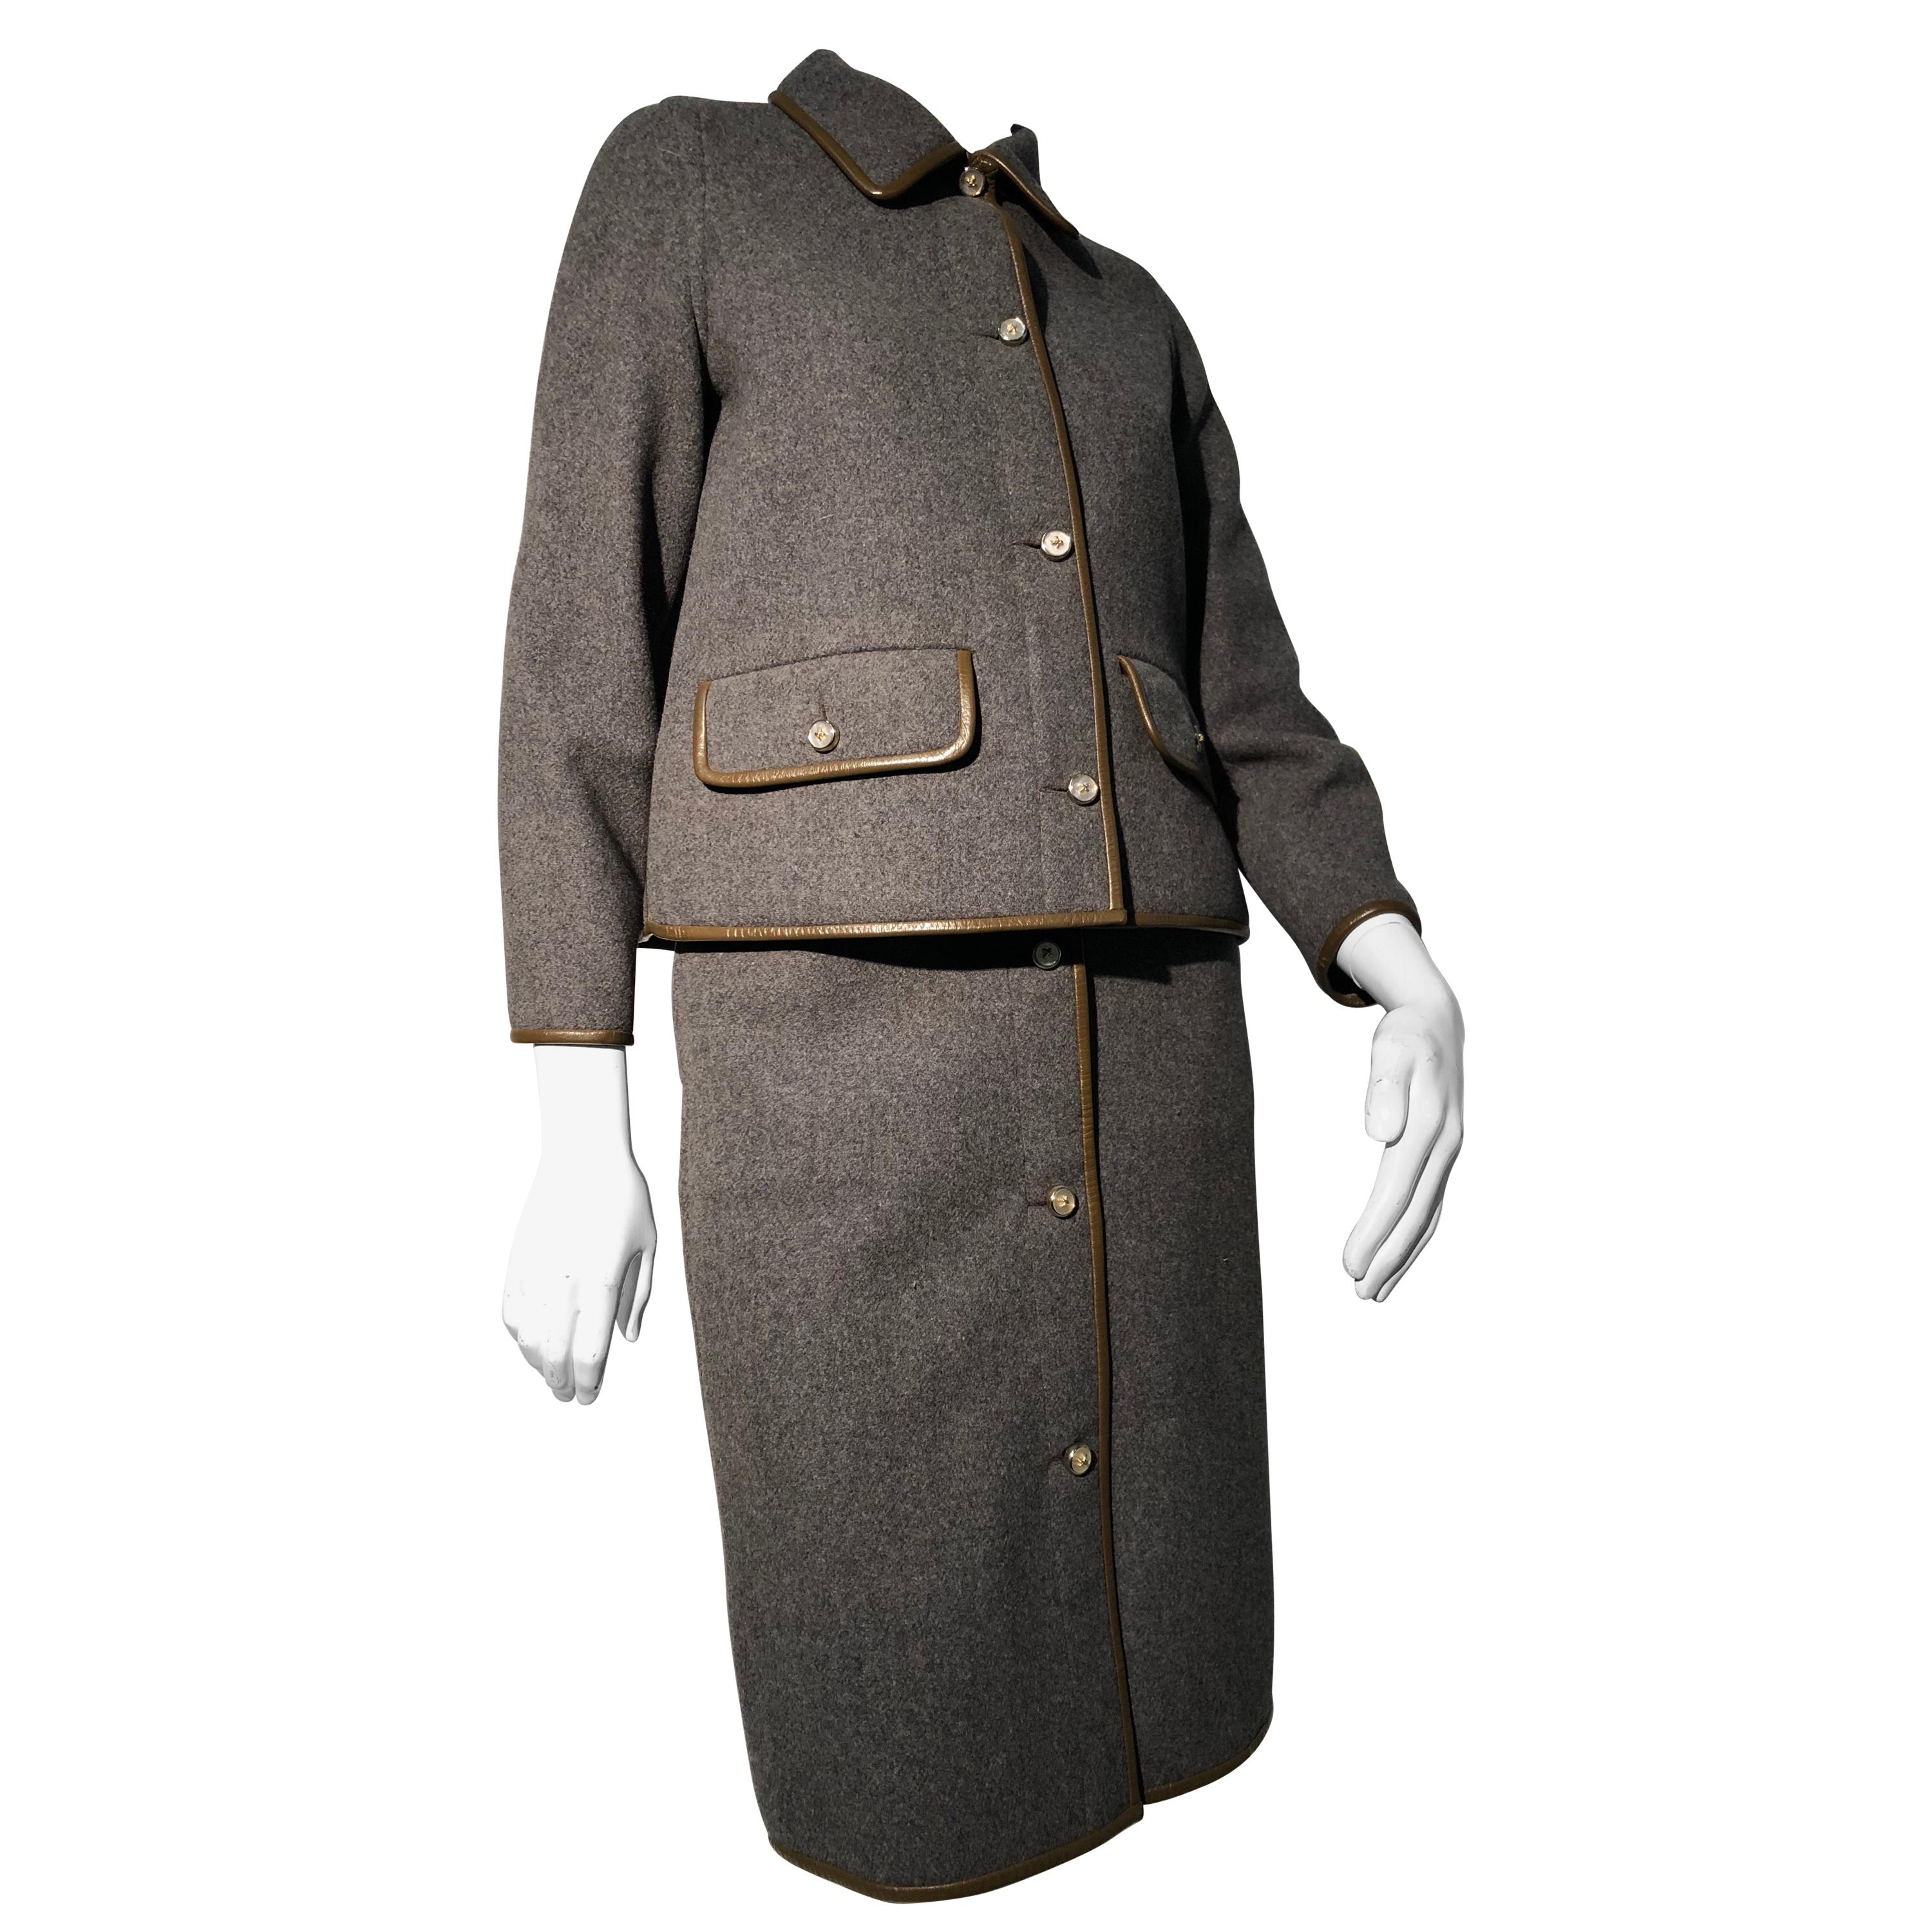 1960s Sills By Bonnie Cashin Mod Gray Wool Skirt Suit W/ Brown Leather Trim